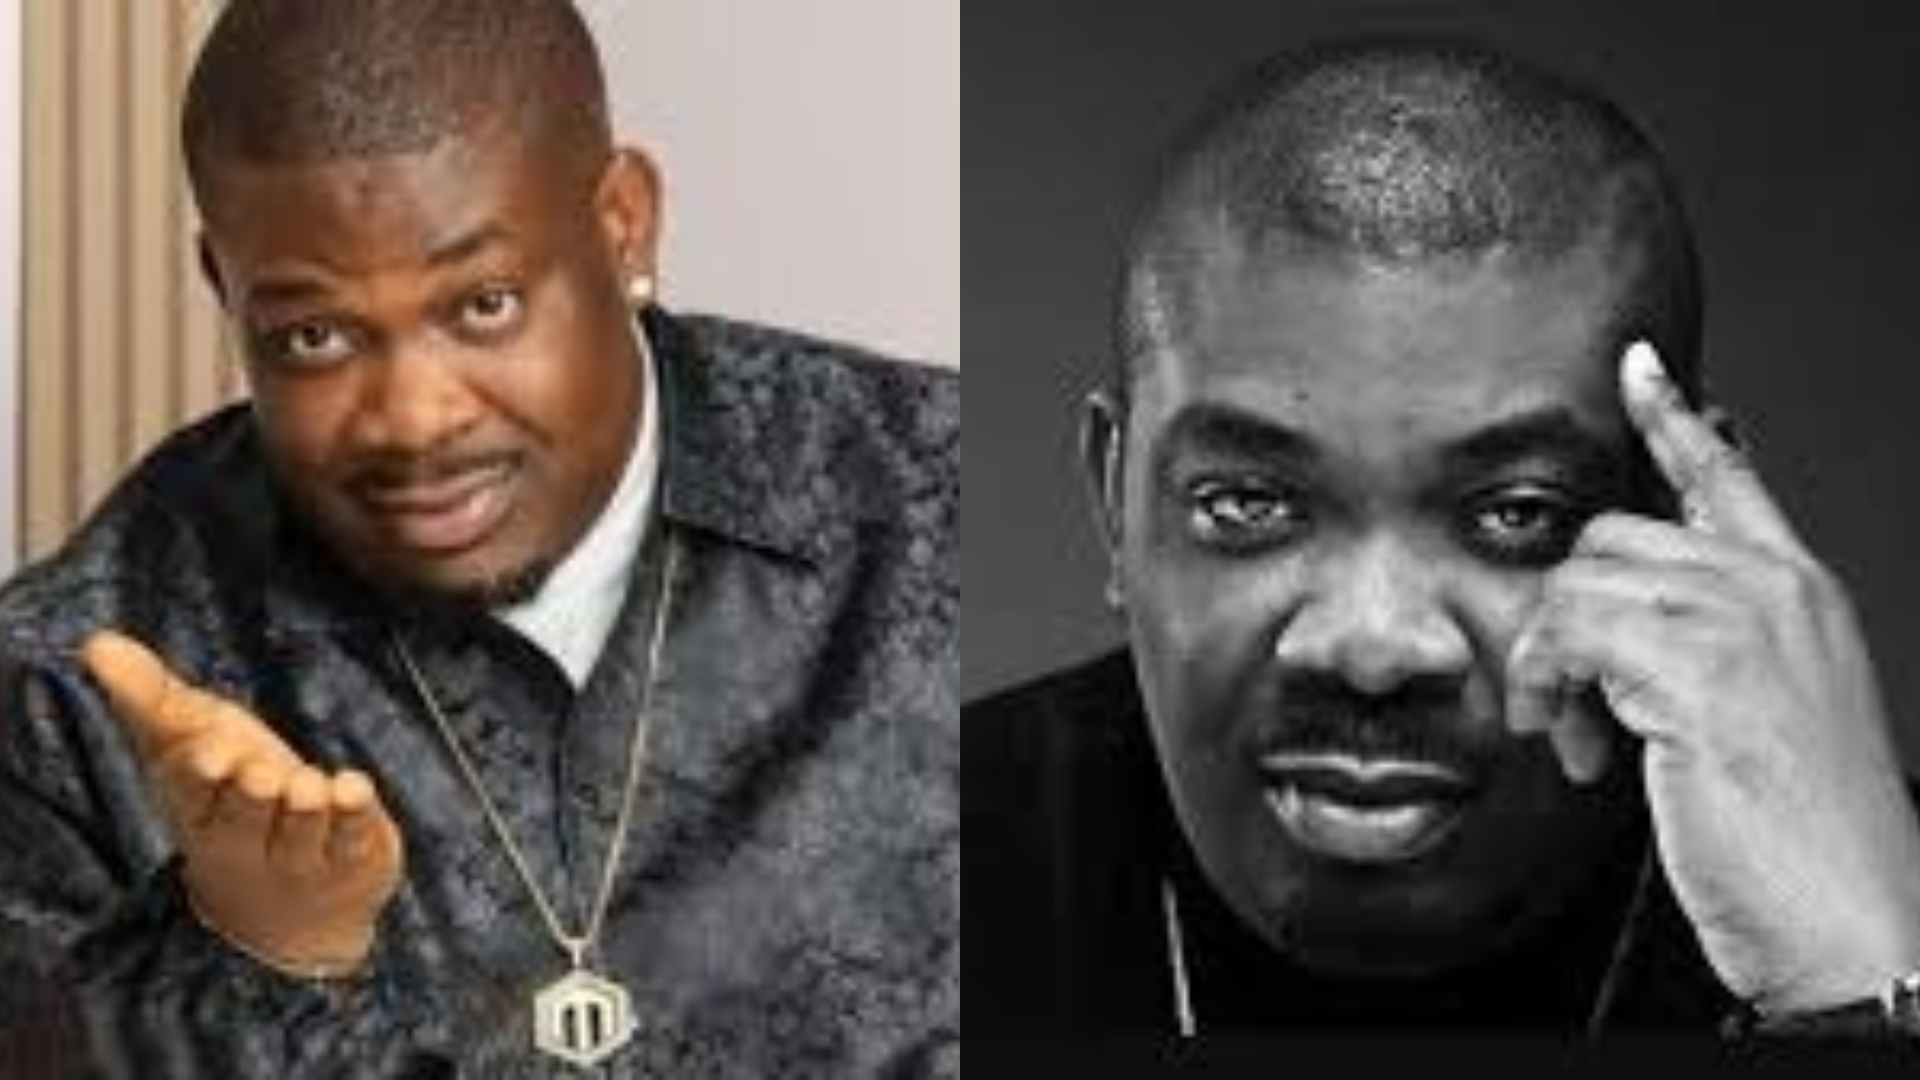 Don Jazzy shares throwback hit songs as he reminds fans of his musical prowess